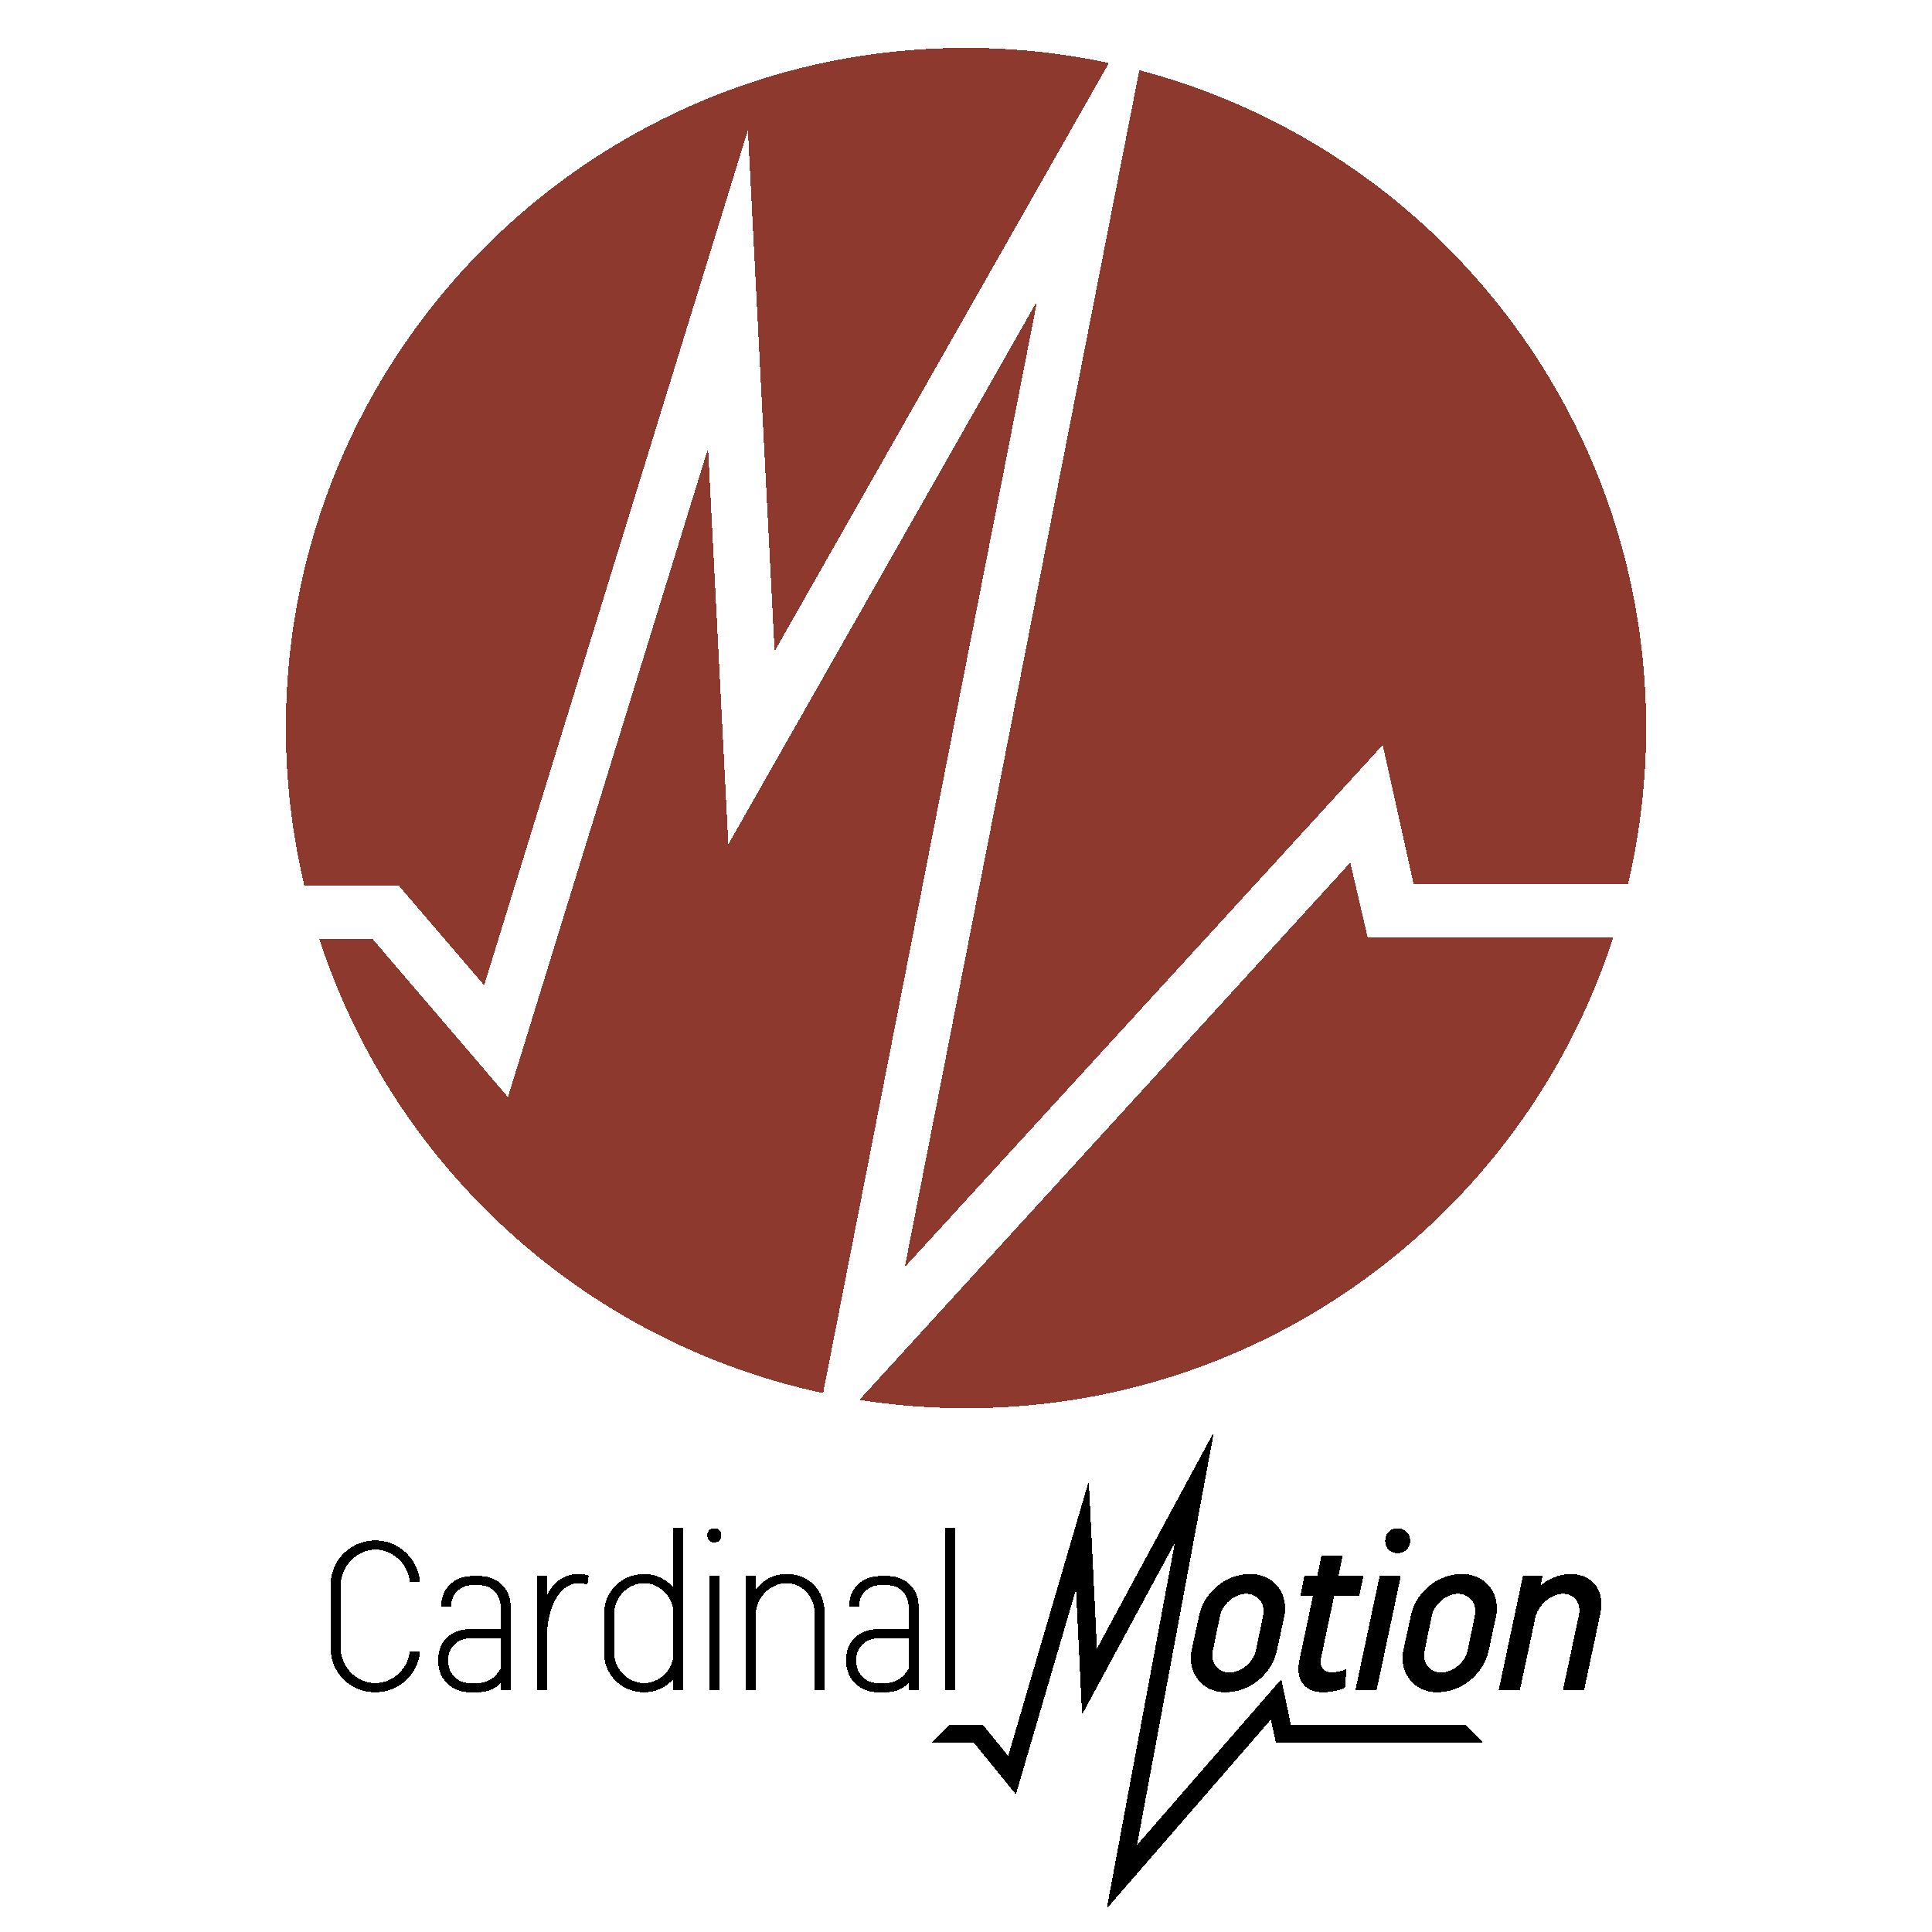 Cardinal Motion - A Fitness Podcast For The Triangle